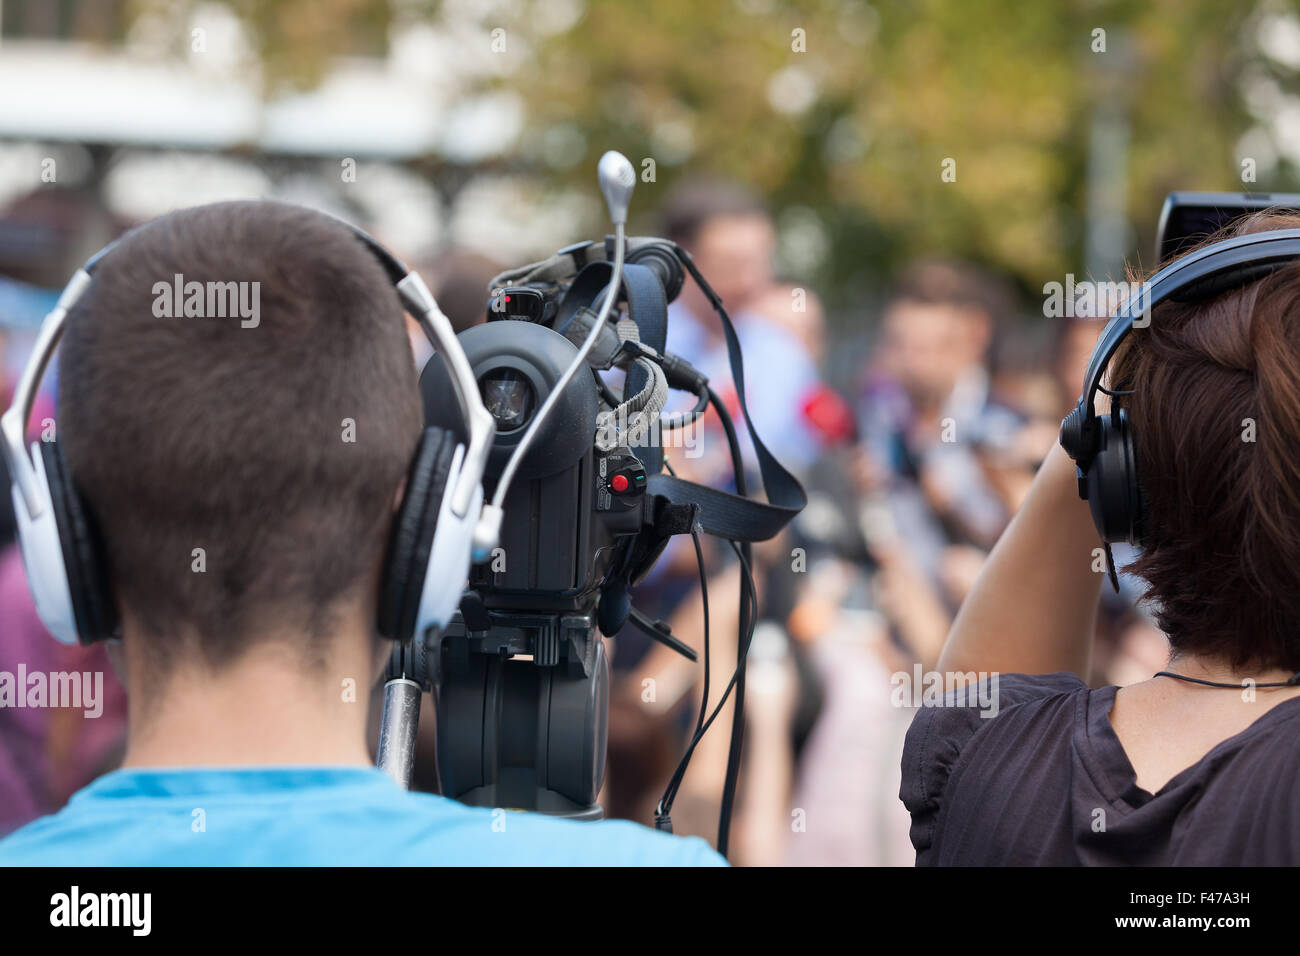 Filming an event with a video camera. Stock Photo